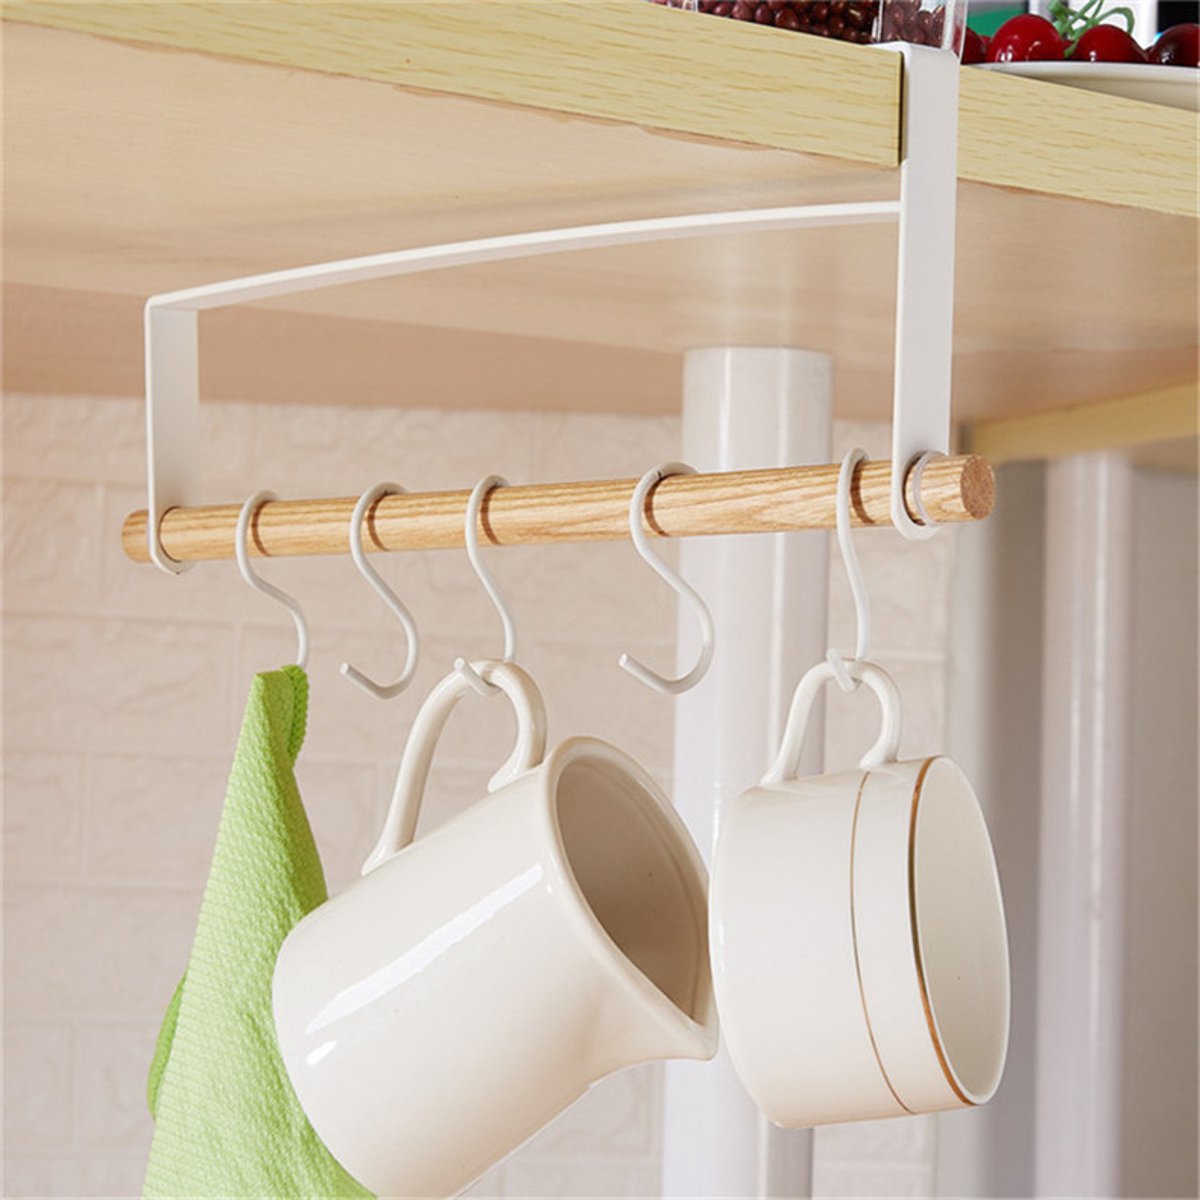 Portable Adhesive Paper Towel Holder Under Cabinet For Toilet Kitchen Bathroom Home